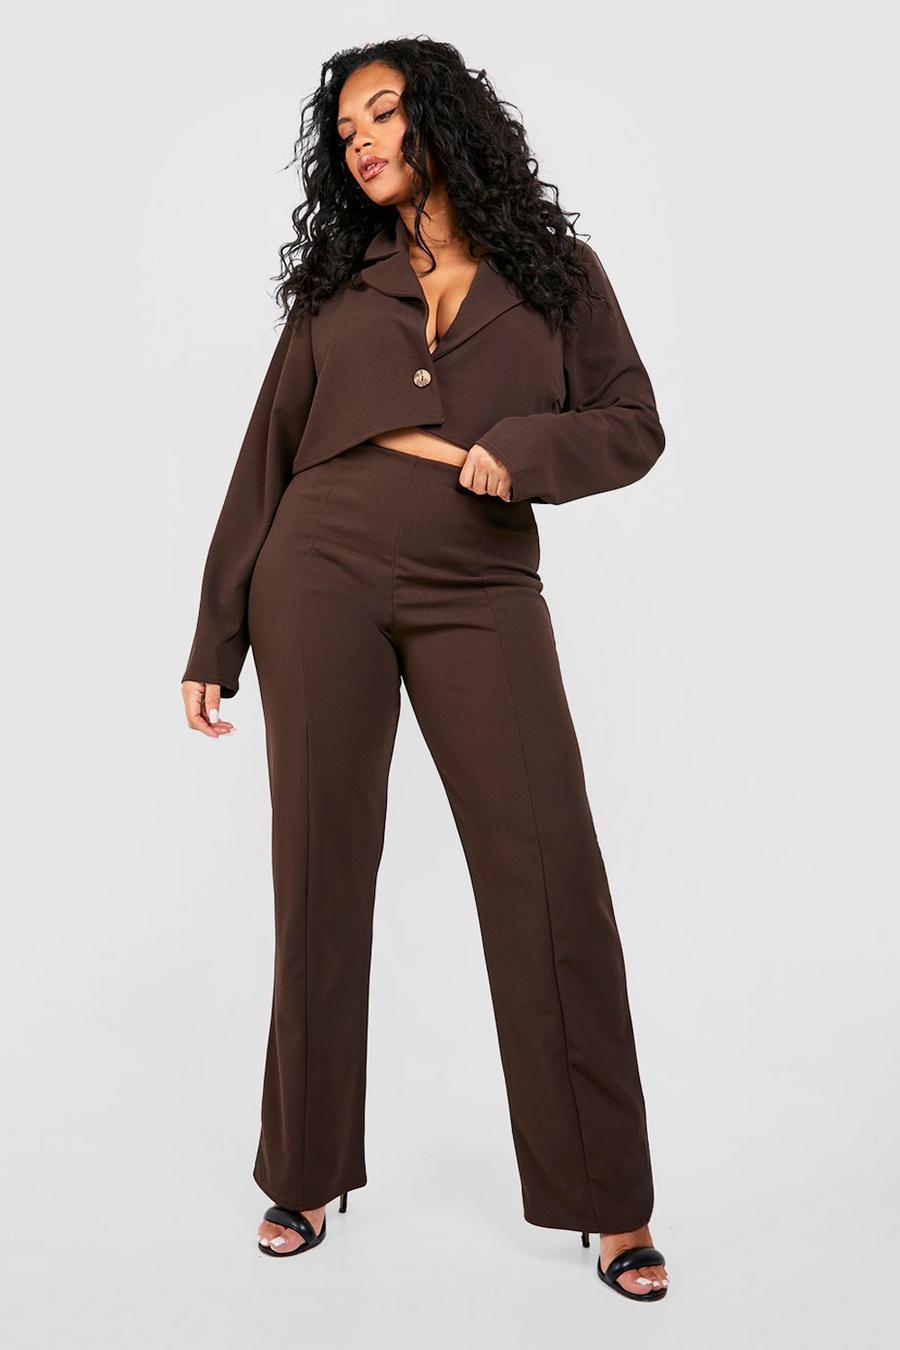 Curve Going Out, Plus Size Party Outfits